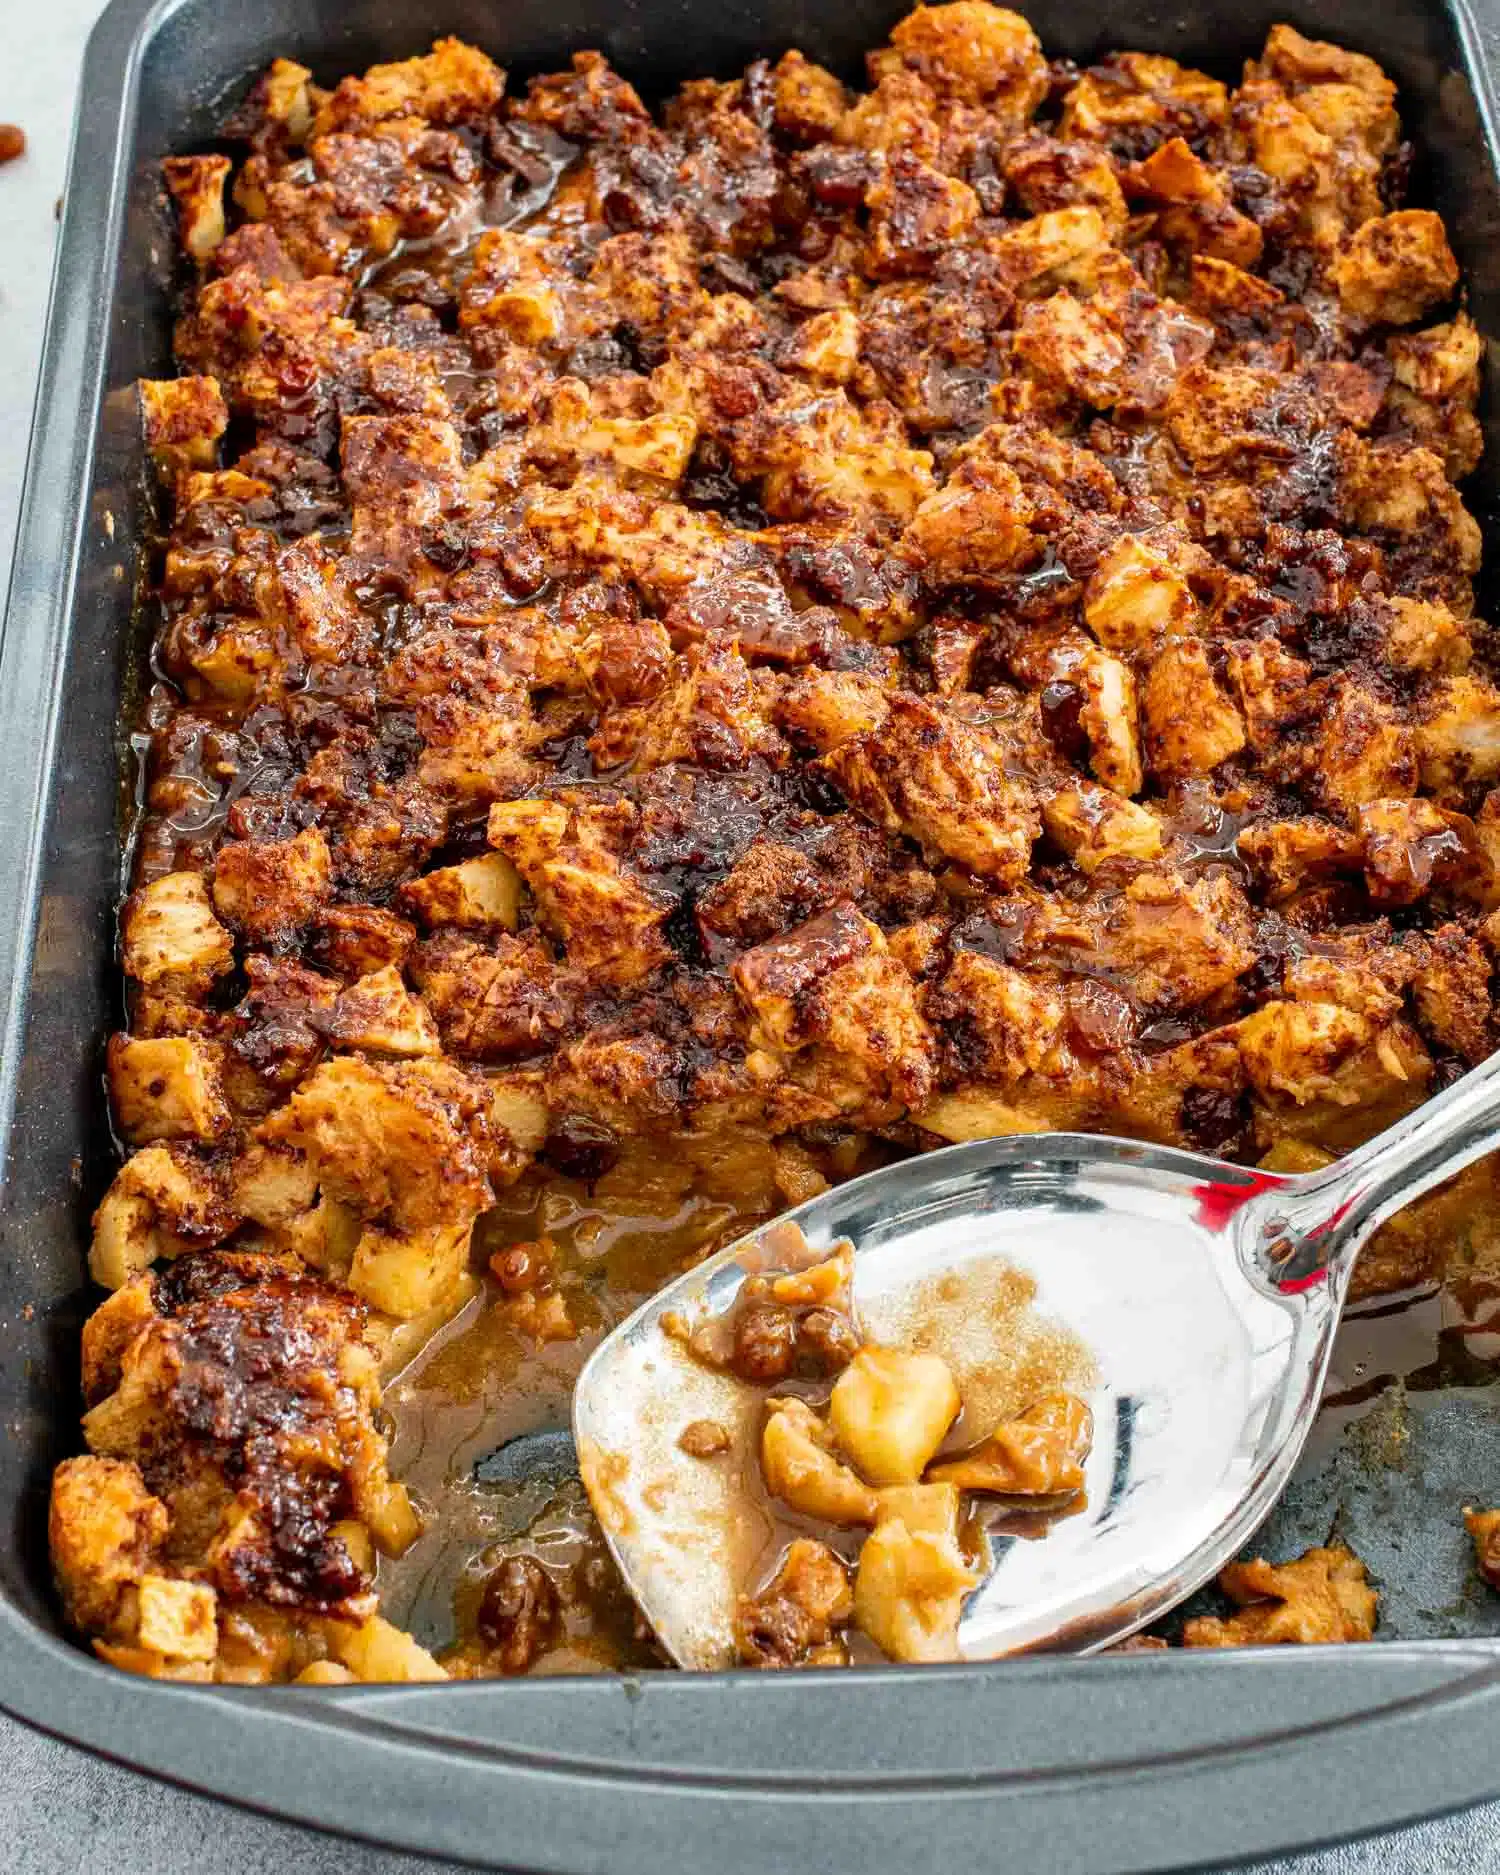 freshly baked apple pie bread pudding in a baking dish with a serving spoon.